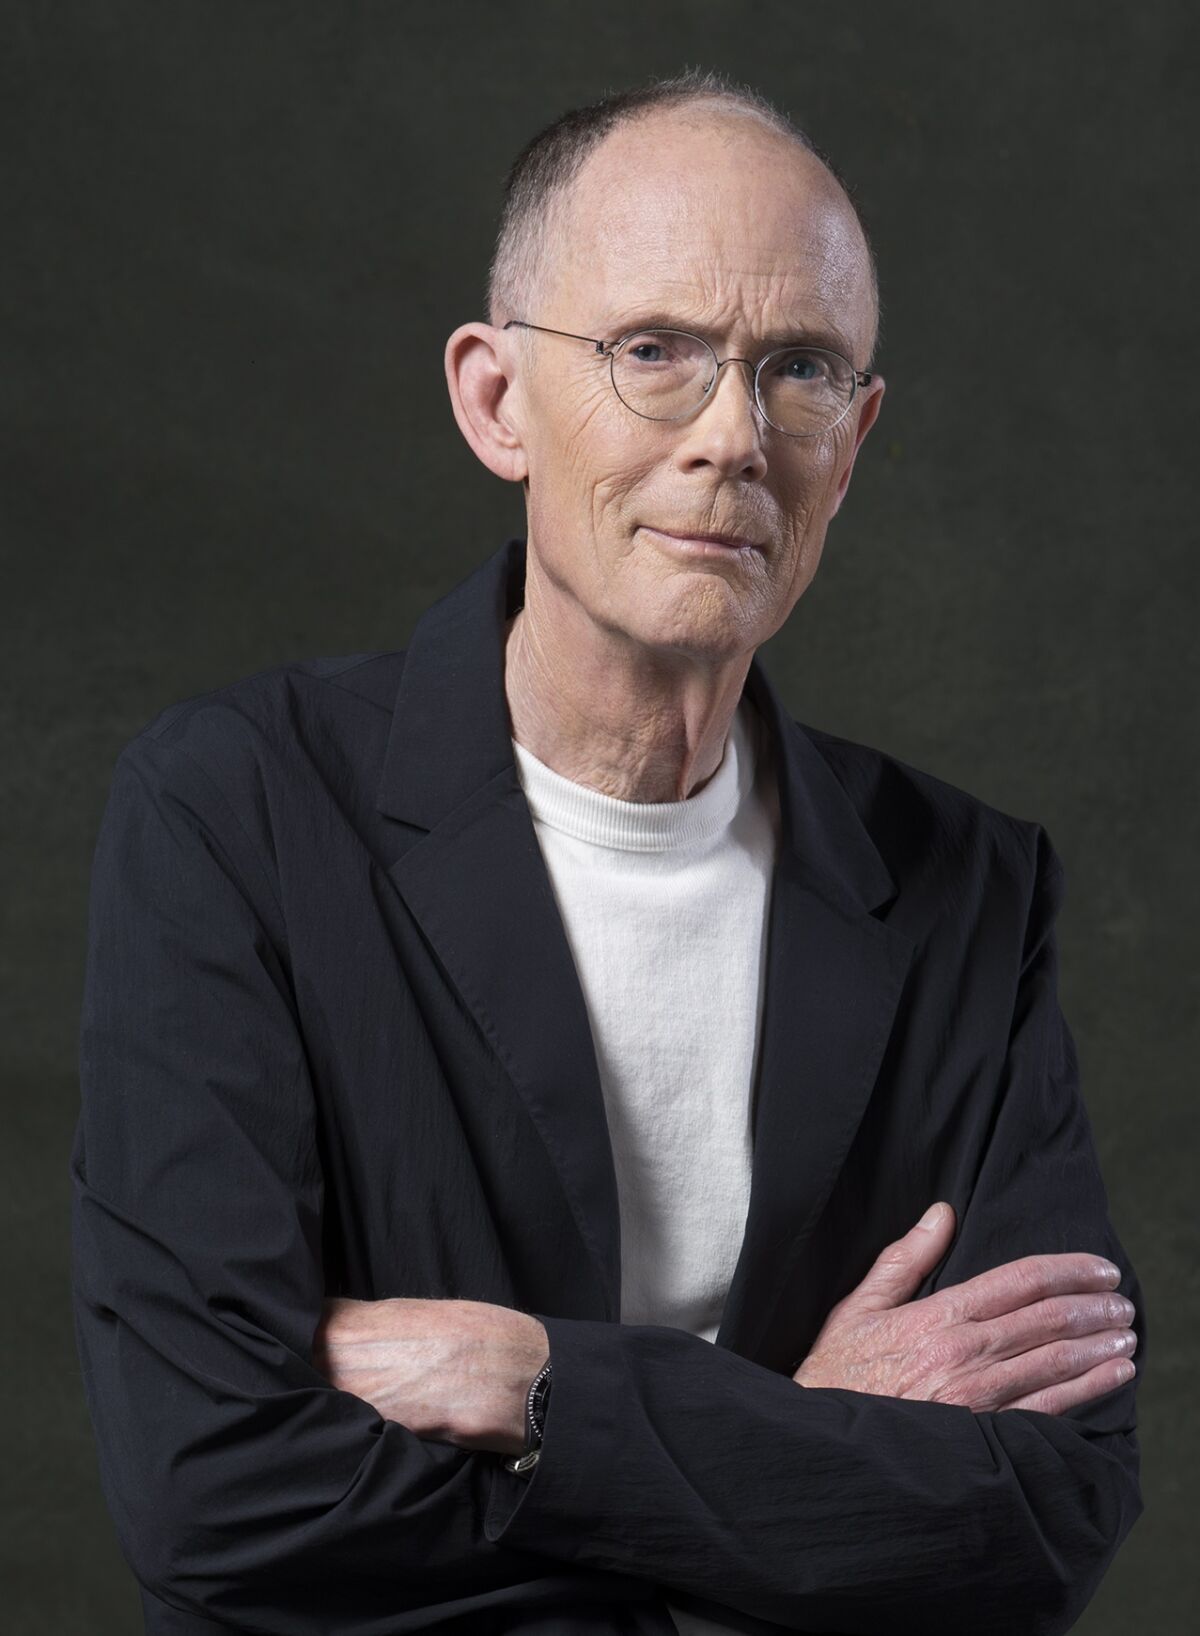 William Gibson, author of "Agency" and pioneer of cyberpunk.